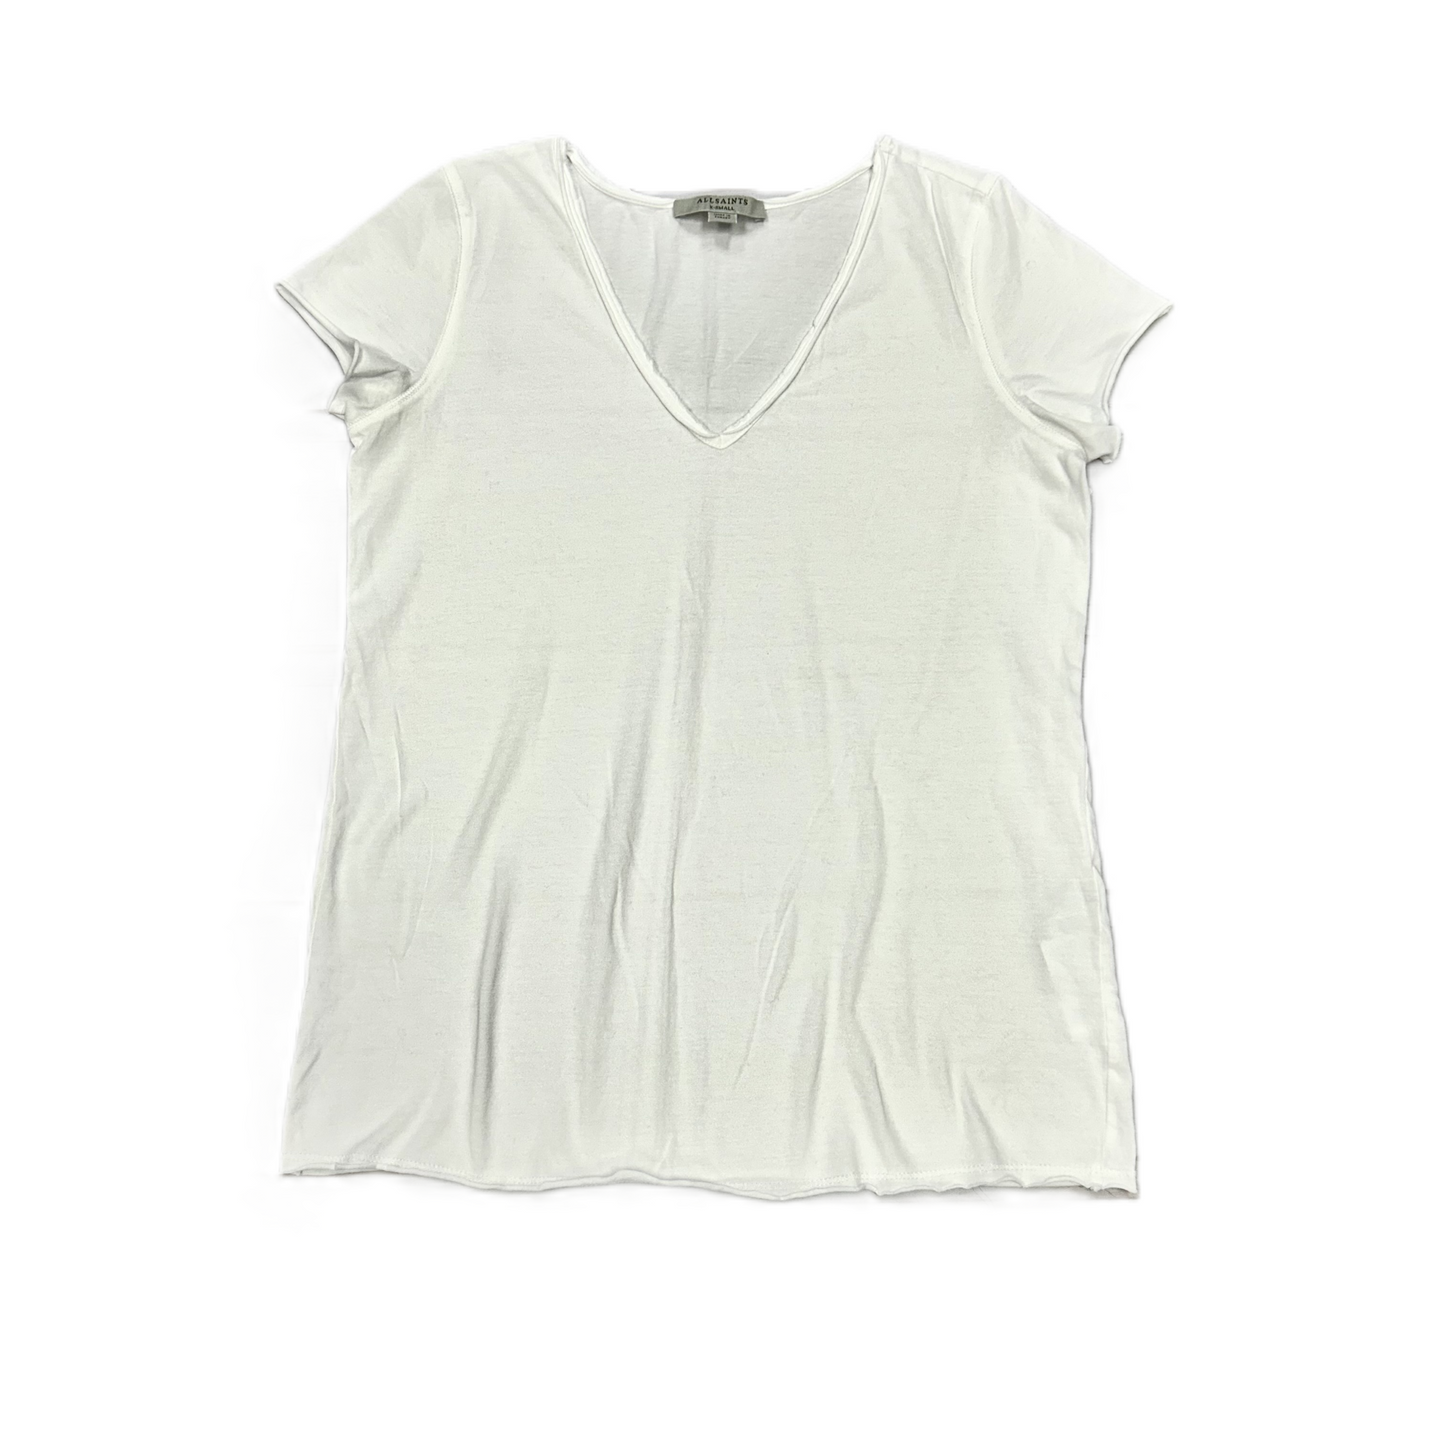 White Top Short Sleeve Designer By All Saints, Size: Xs